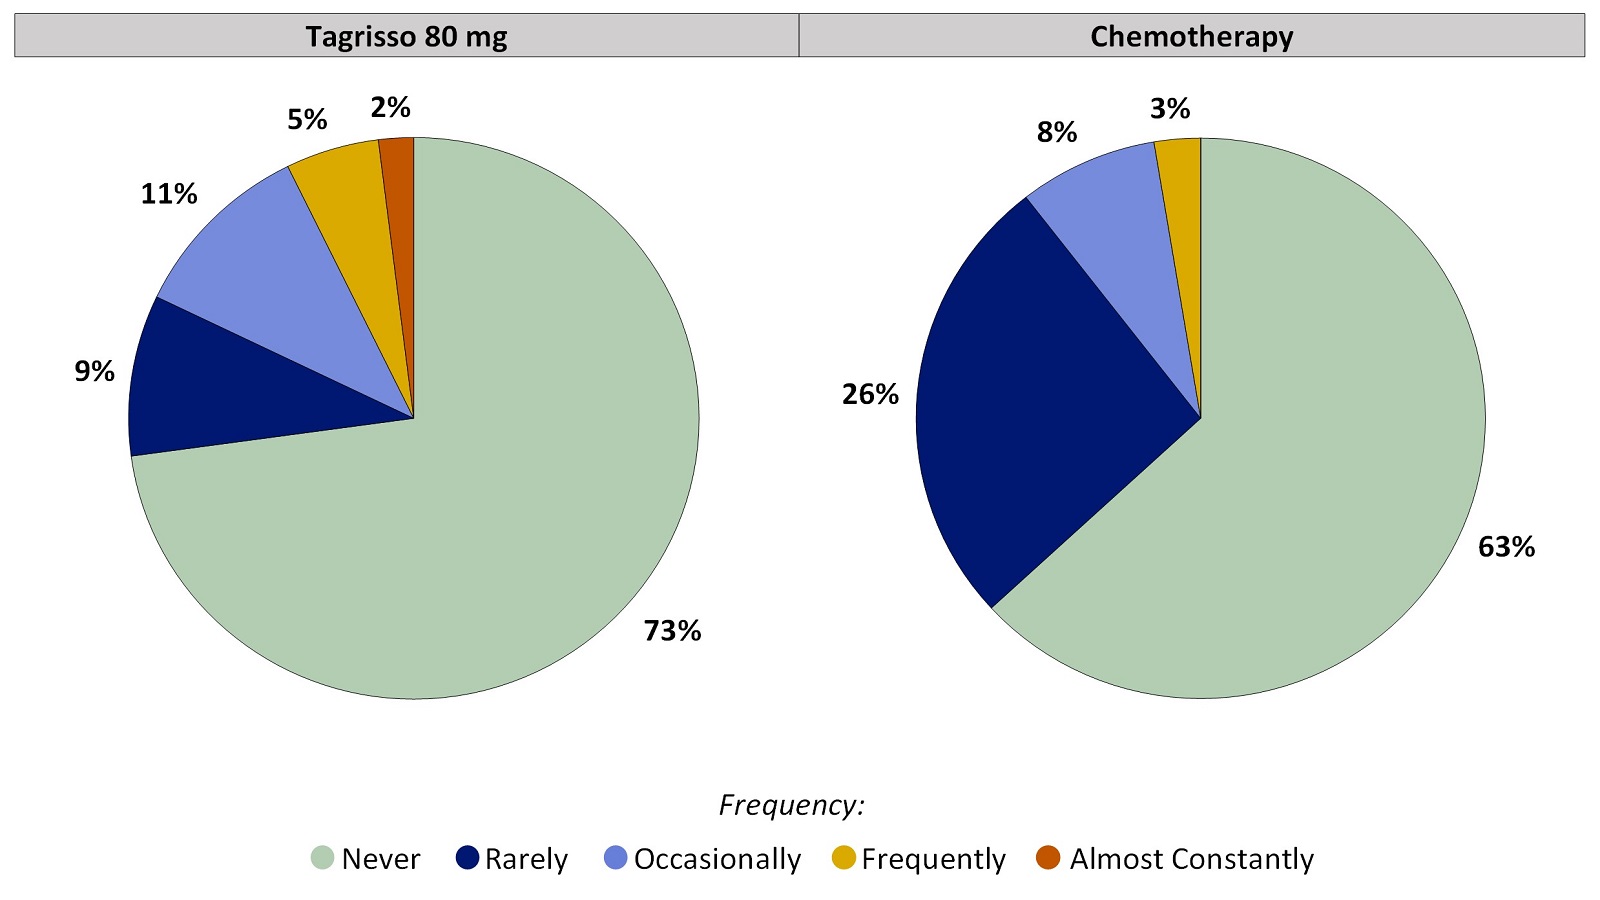 Two pie charts, one for Tagrisso and the other for chemotherapy, which includes only those patients who had no Loss of Control of Bowel Movements before treatment. The pie charts summarize the percentage of patients by worst reported Loss of Control of Bowel Movements. In the Tagrisso arm, Never (73%), Rarely (9%), Occasionally (11%), Frequently (5%) and Almost constantly (2%). In the chemotherapy arm, Never (63%), Rarely (26%), Occasionally (8%), Frequently (3%) and Almost constantly (0%).